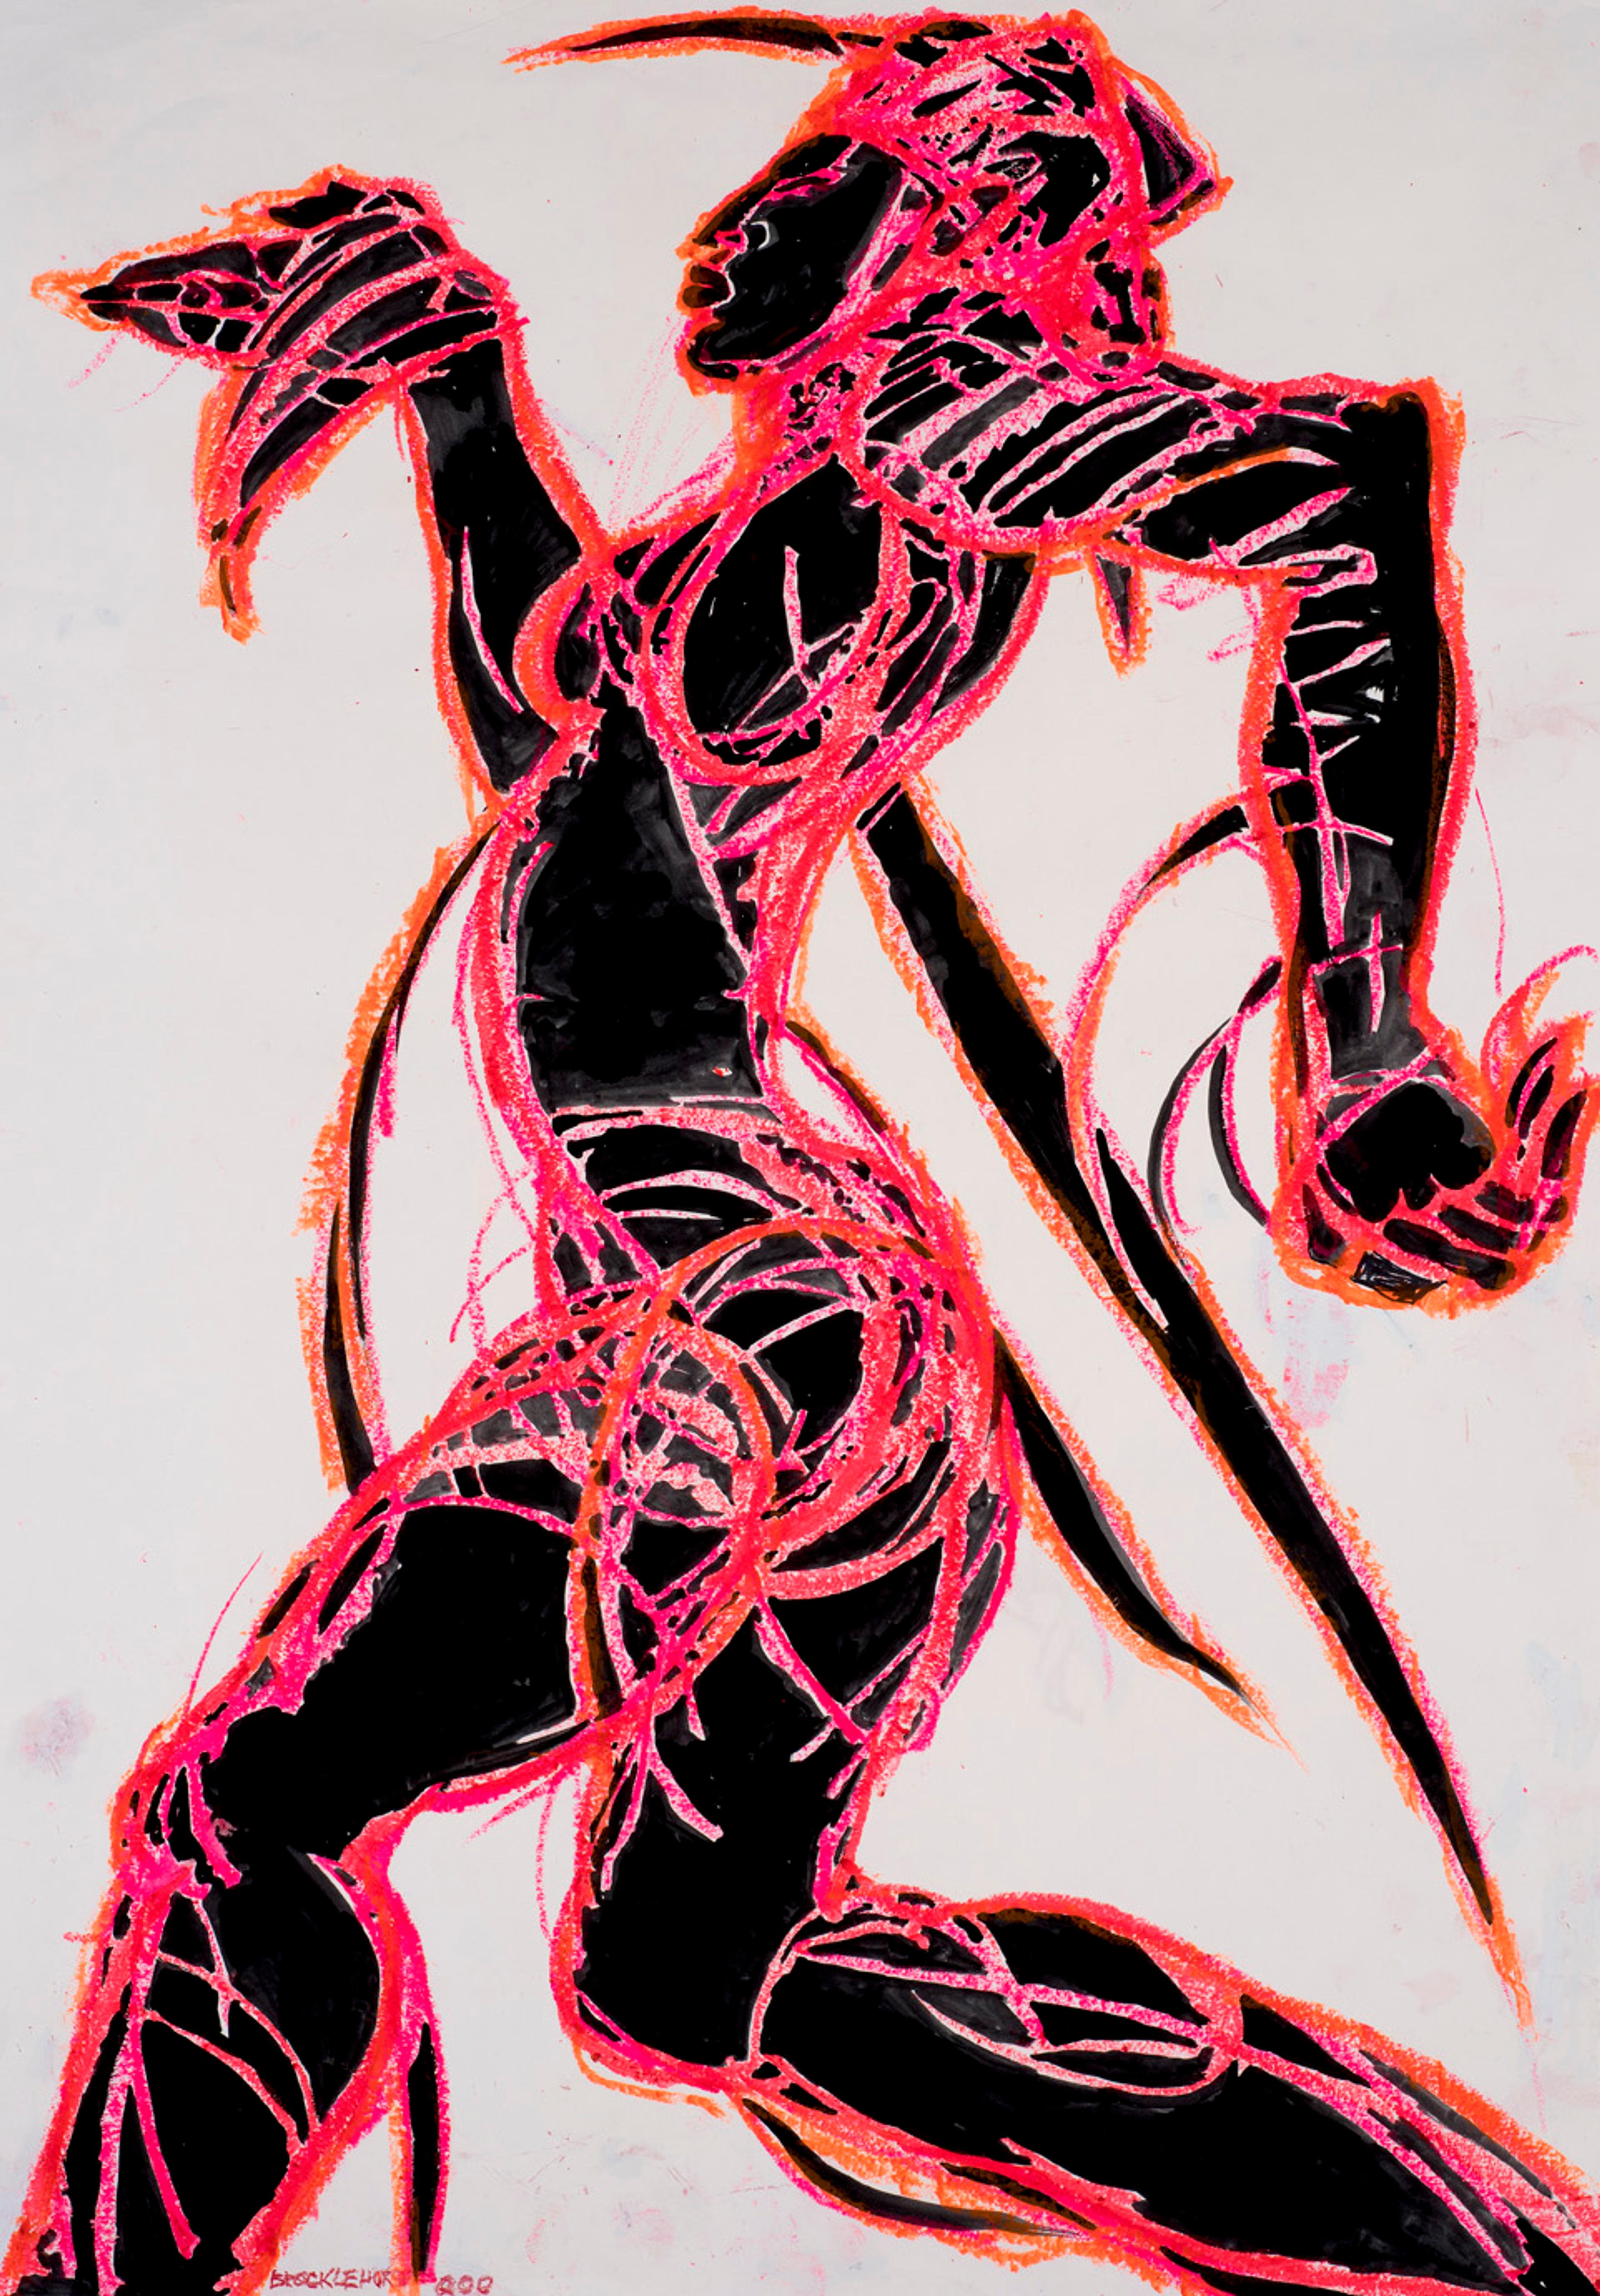 A drawing of a person dancing dressed in a black bodysuit, gloves and hat. The whole figure is coloured black and drawn with pink and orange lines on white paper.